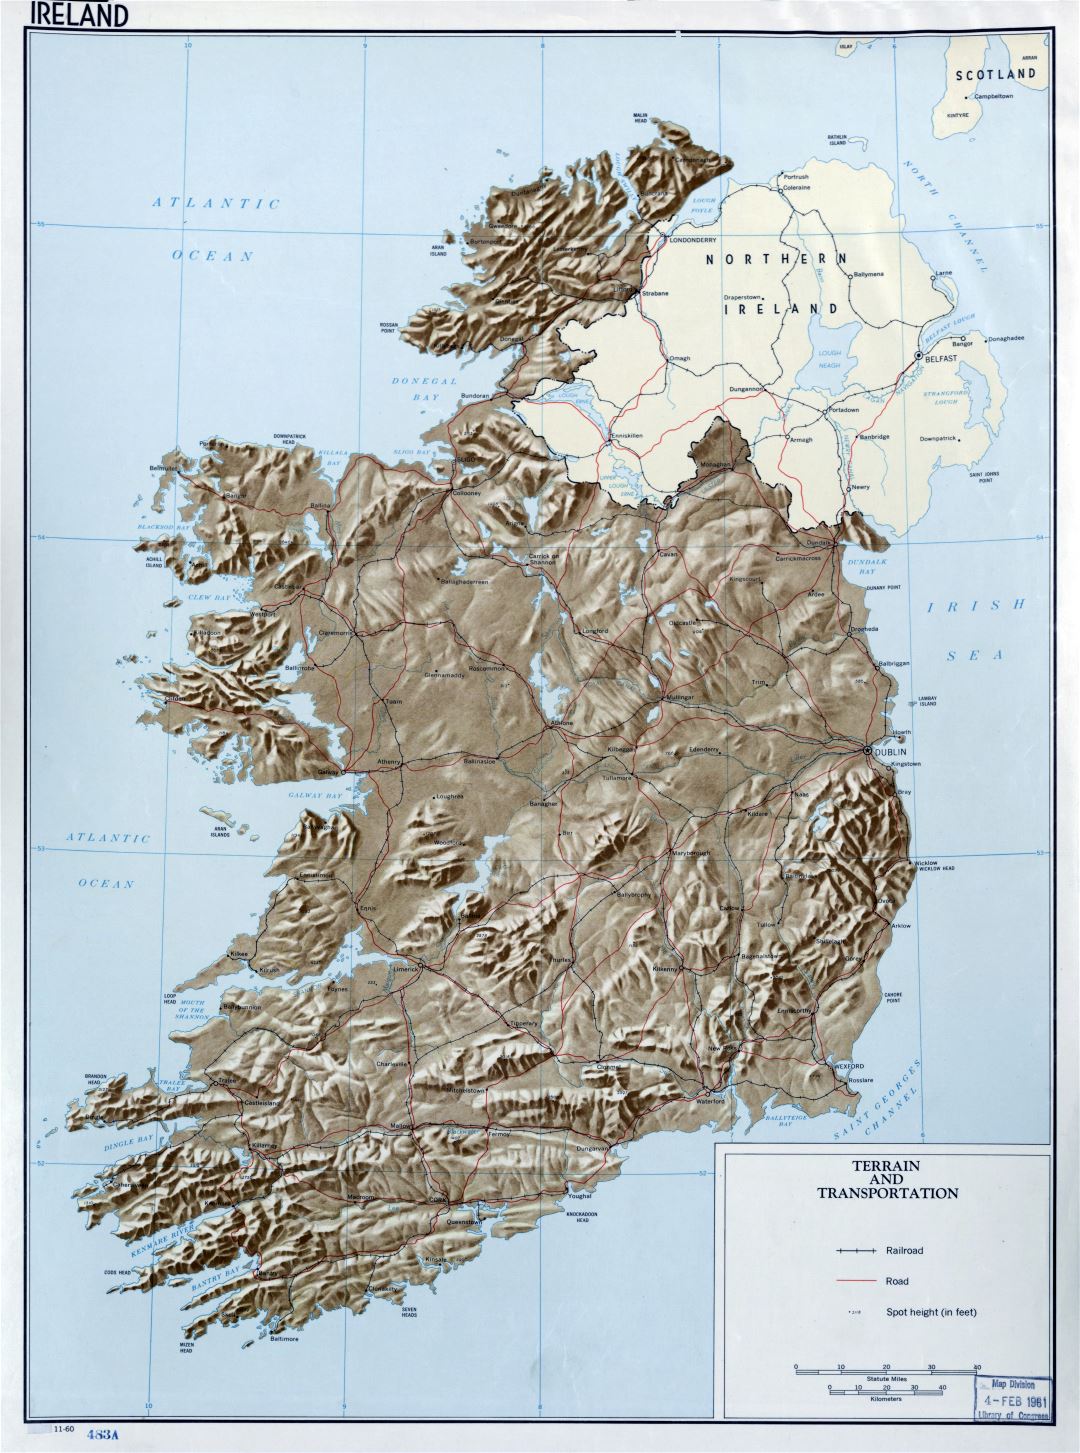 Large scale detailed terrain and transportation map of Ireland - 1960